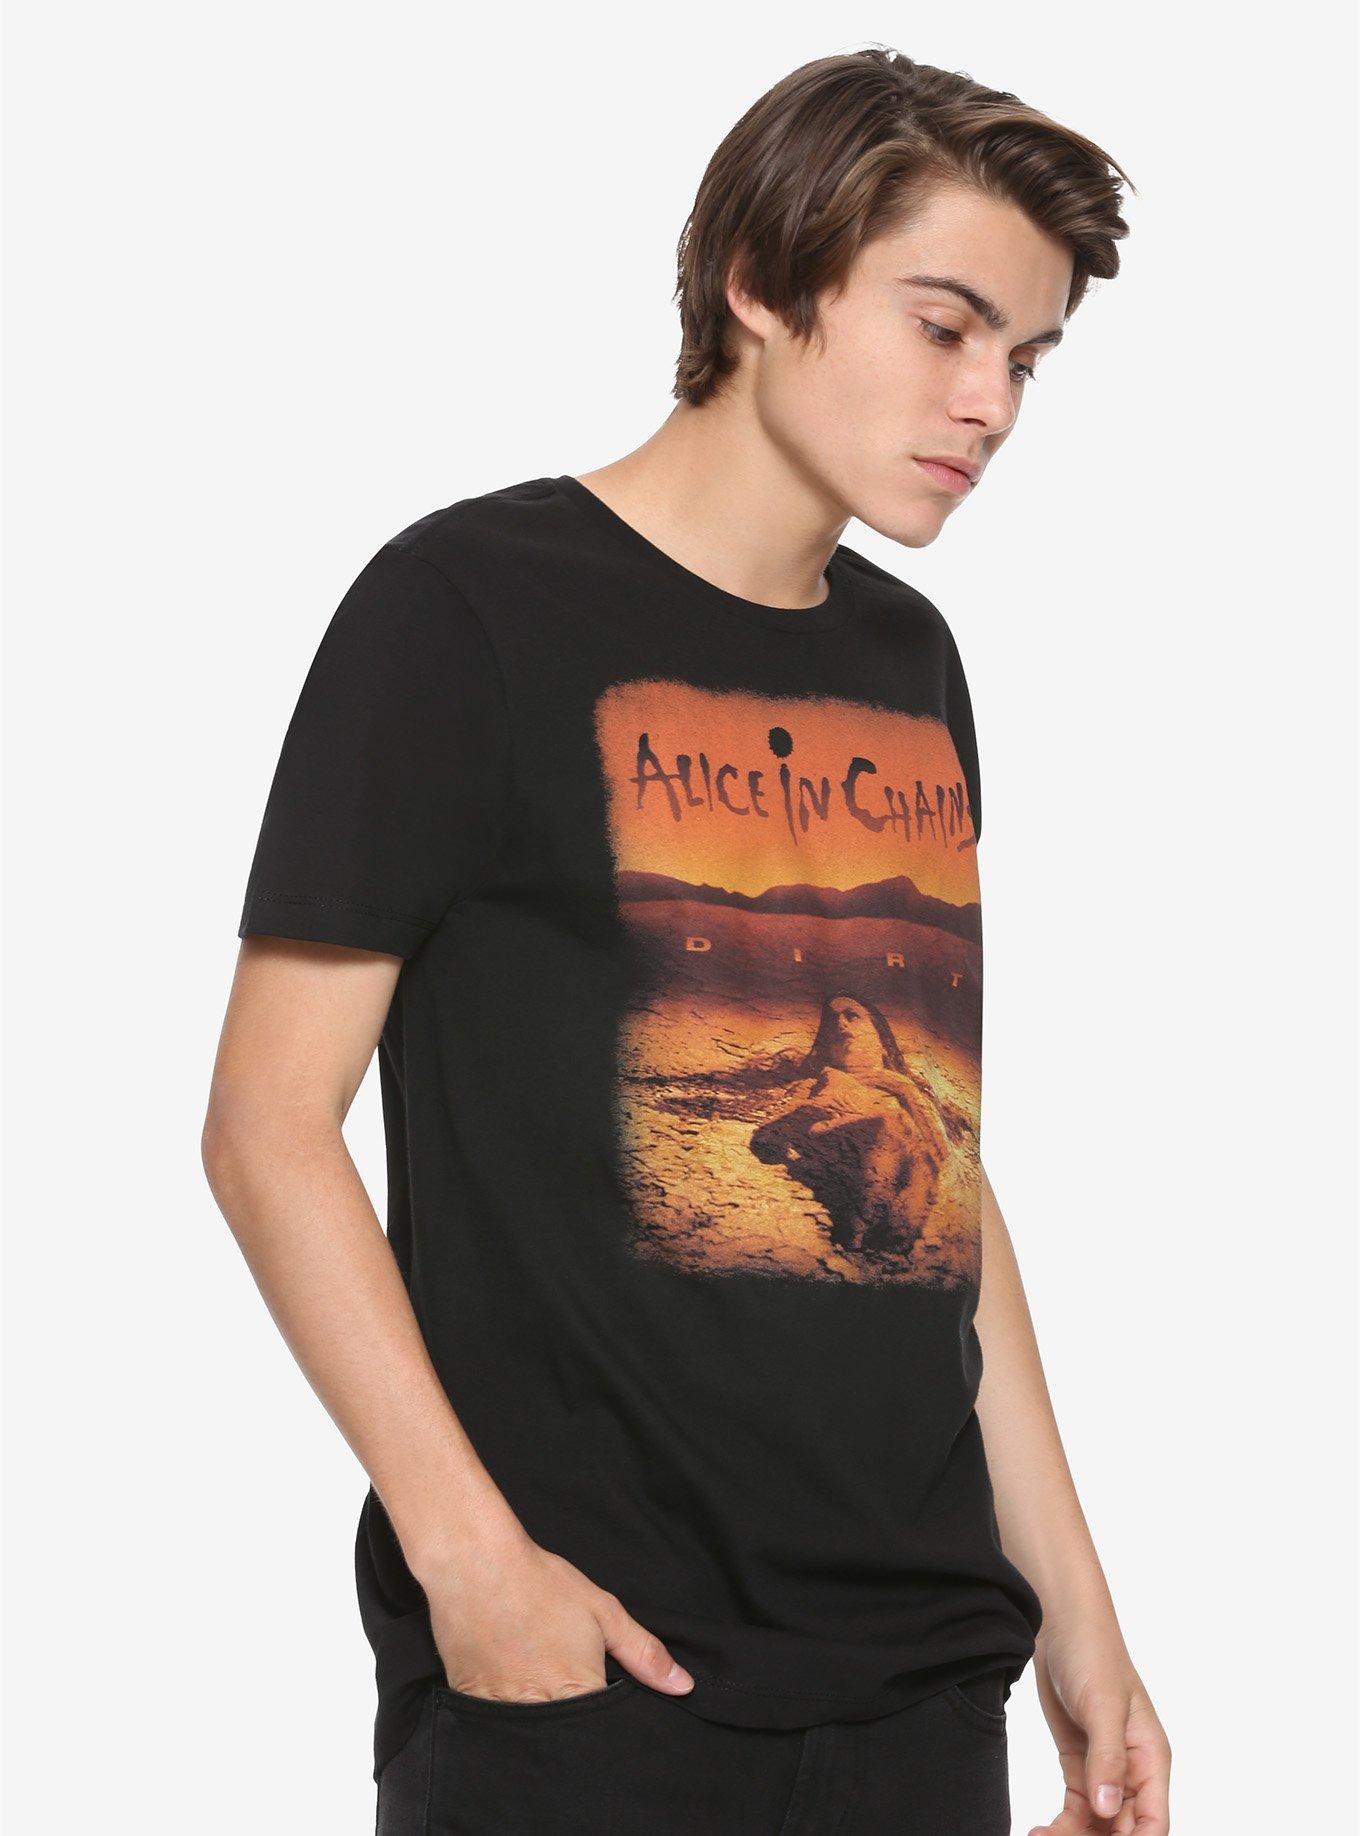 Alice In Chains Dirt Album Shirt - Tagotee